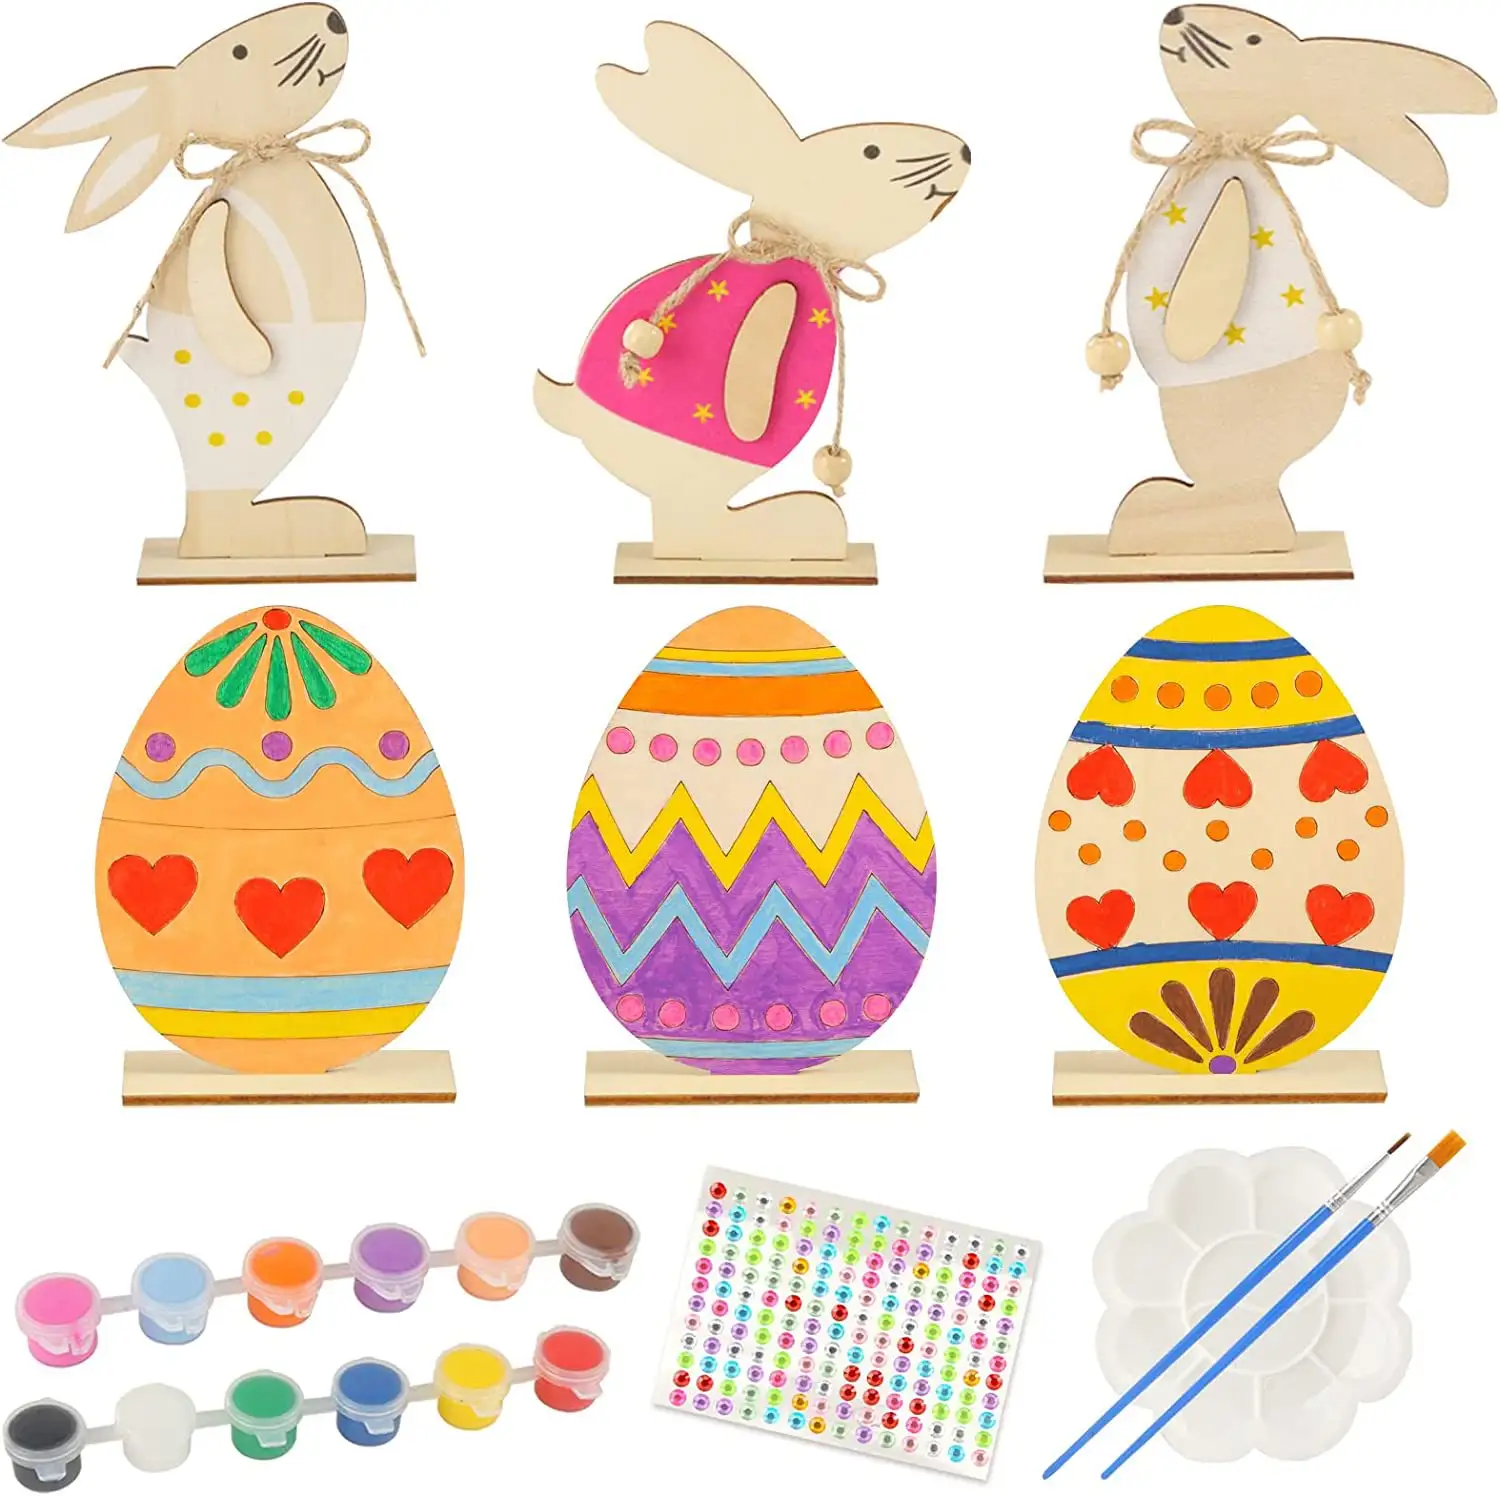 Easter Rabbit Wood Carving Unfinished Rabbit Shape Arts and Crafts Easter Spring Home Decoration Classroom DIY Craft